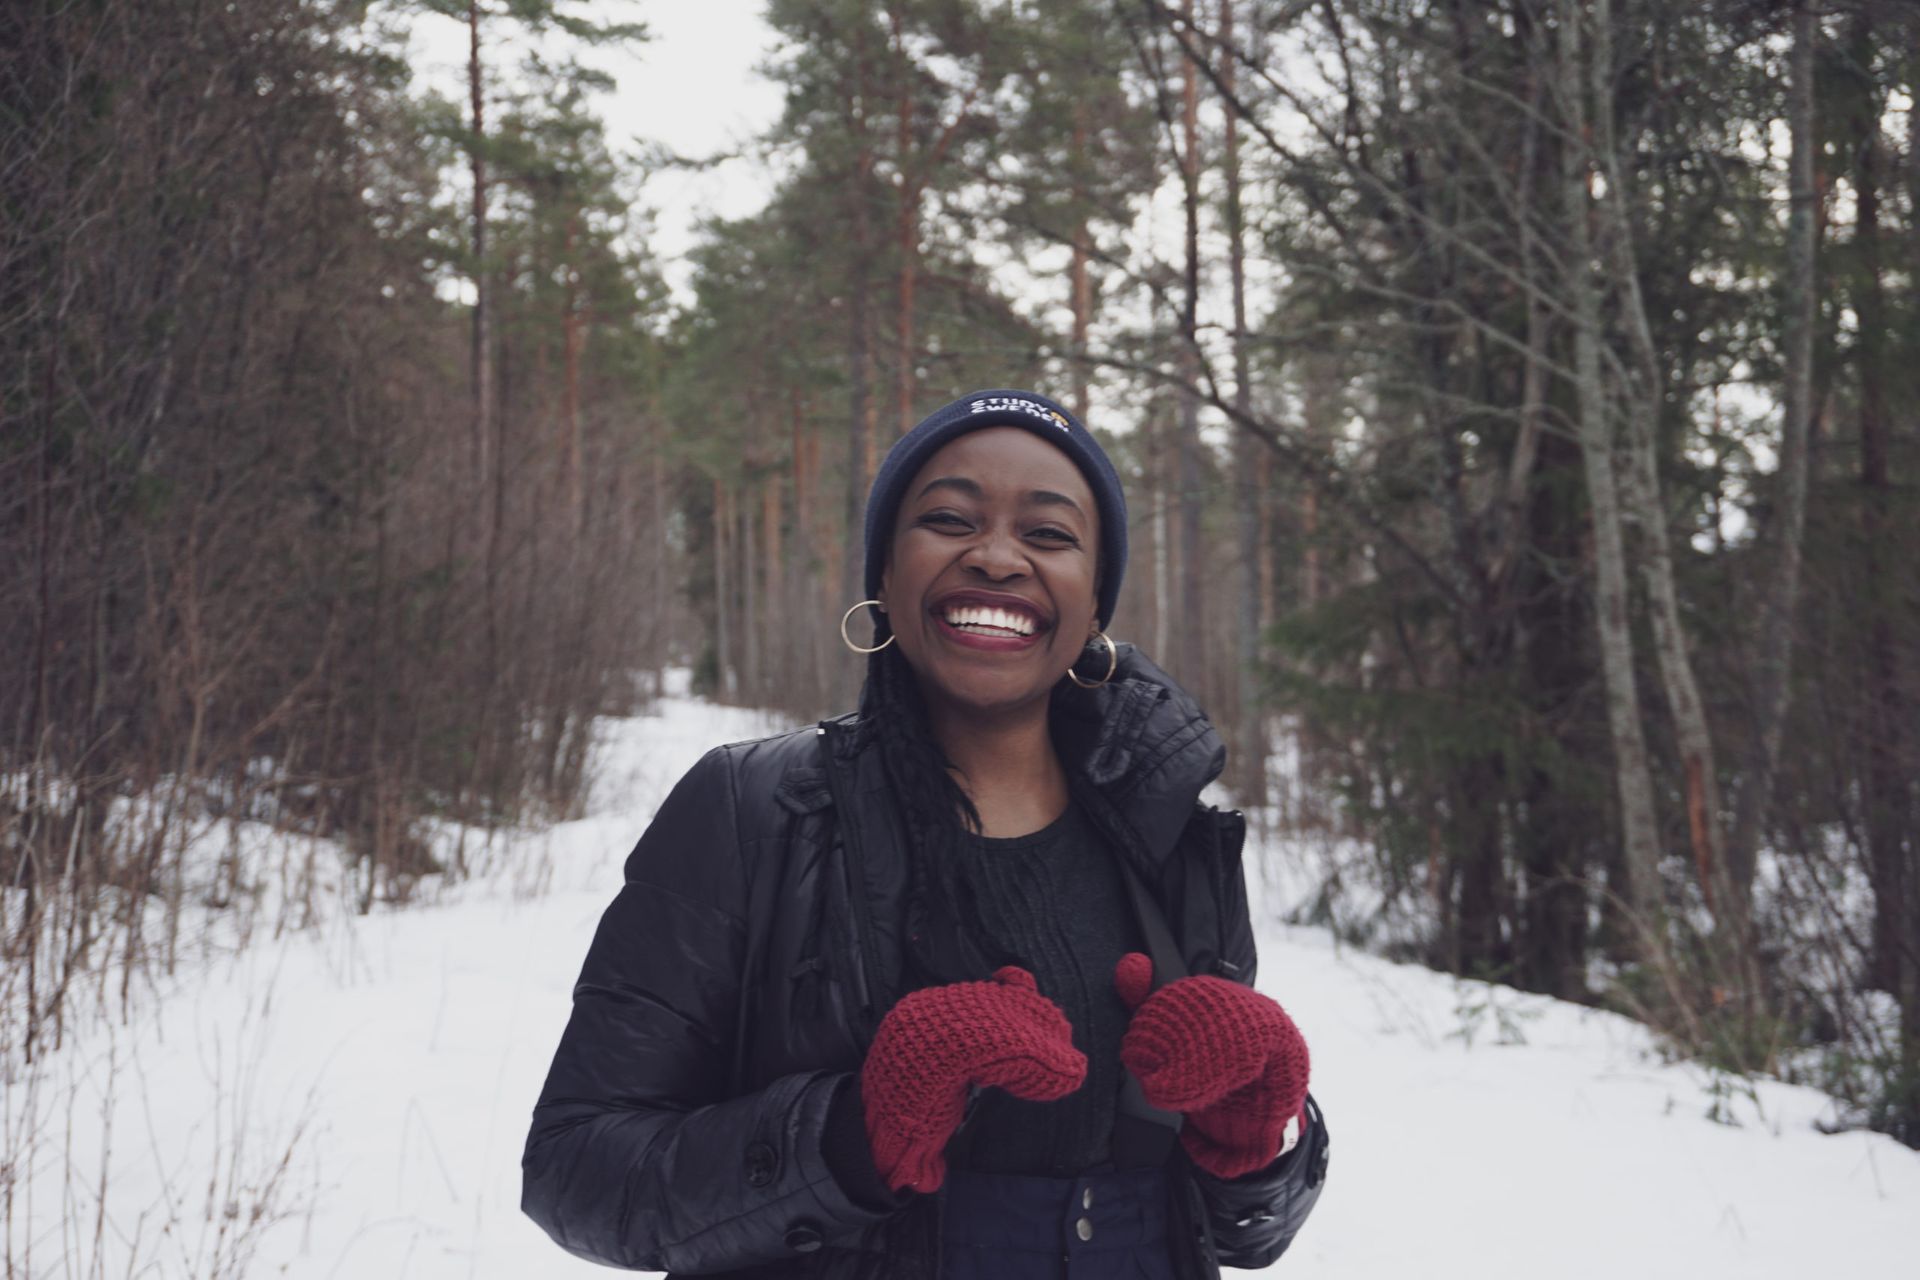 A smiling woman on a snowy, yet cloudy, day in the woods.